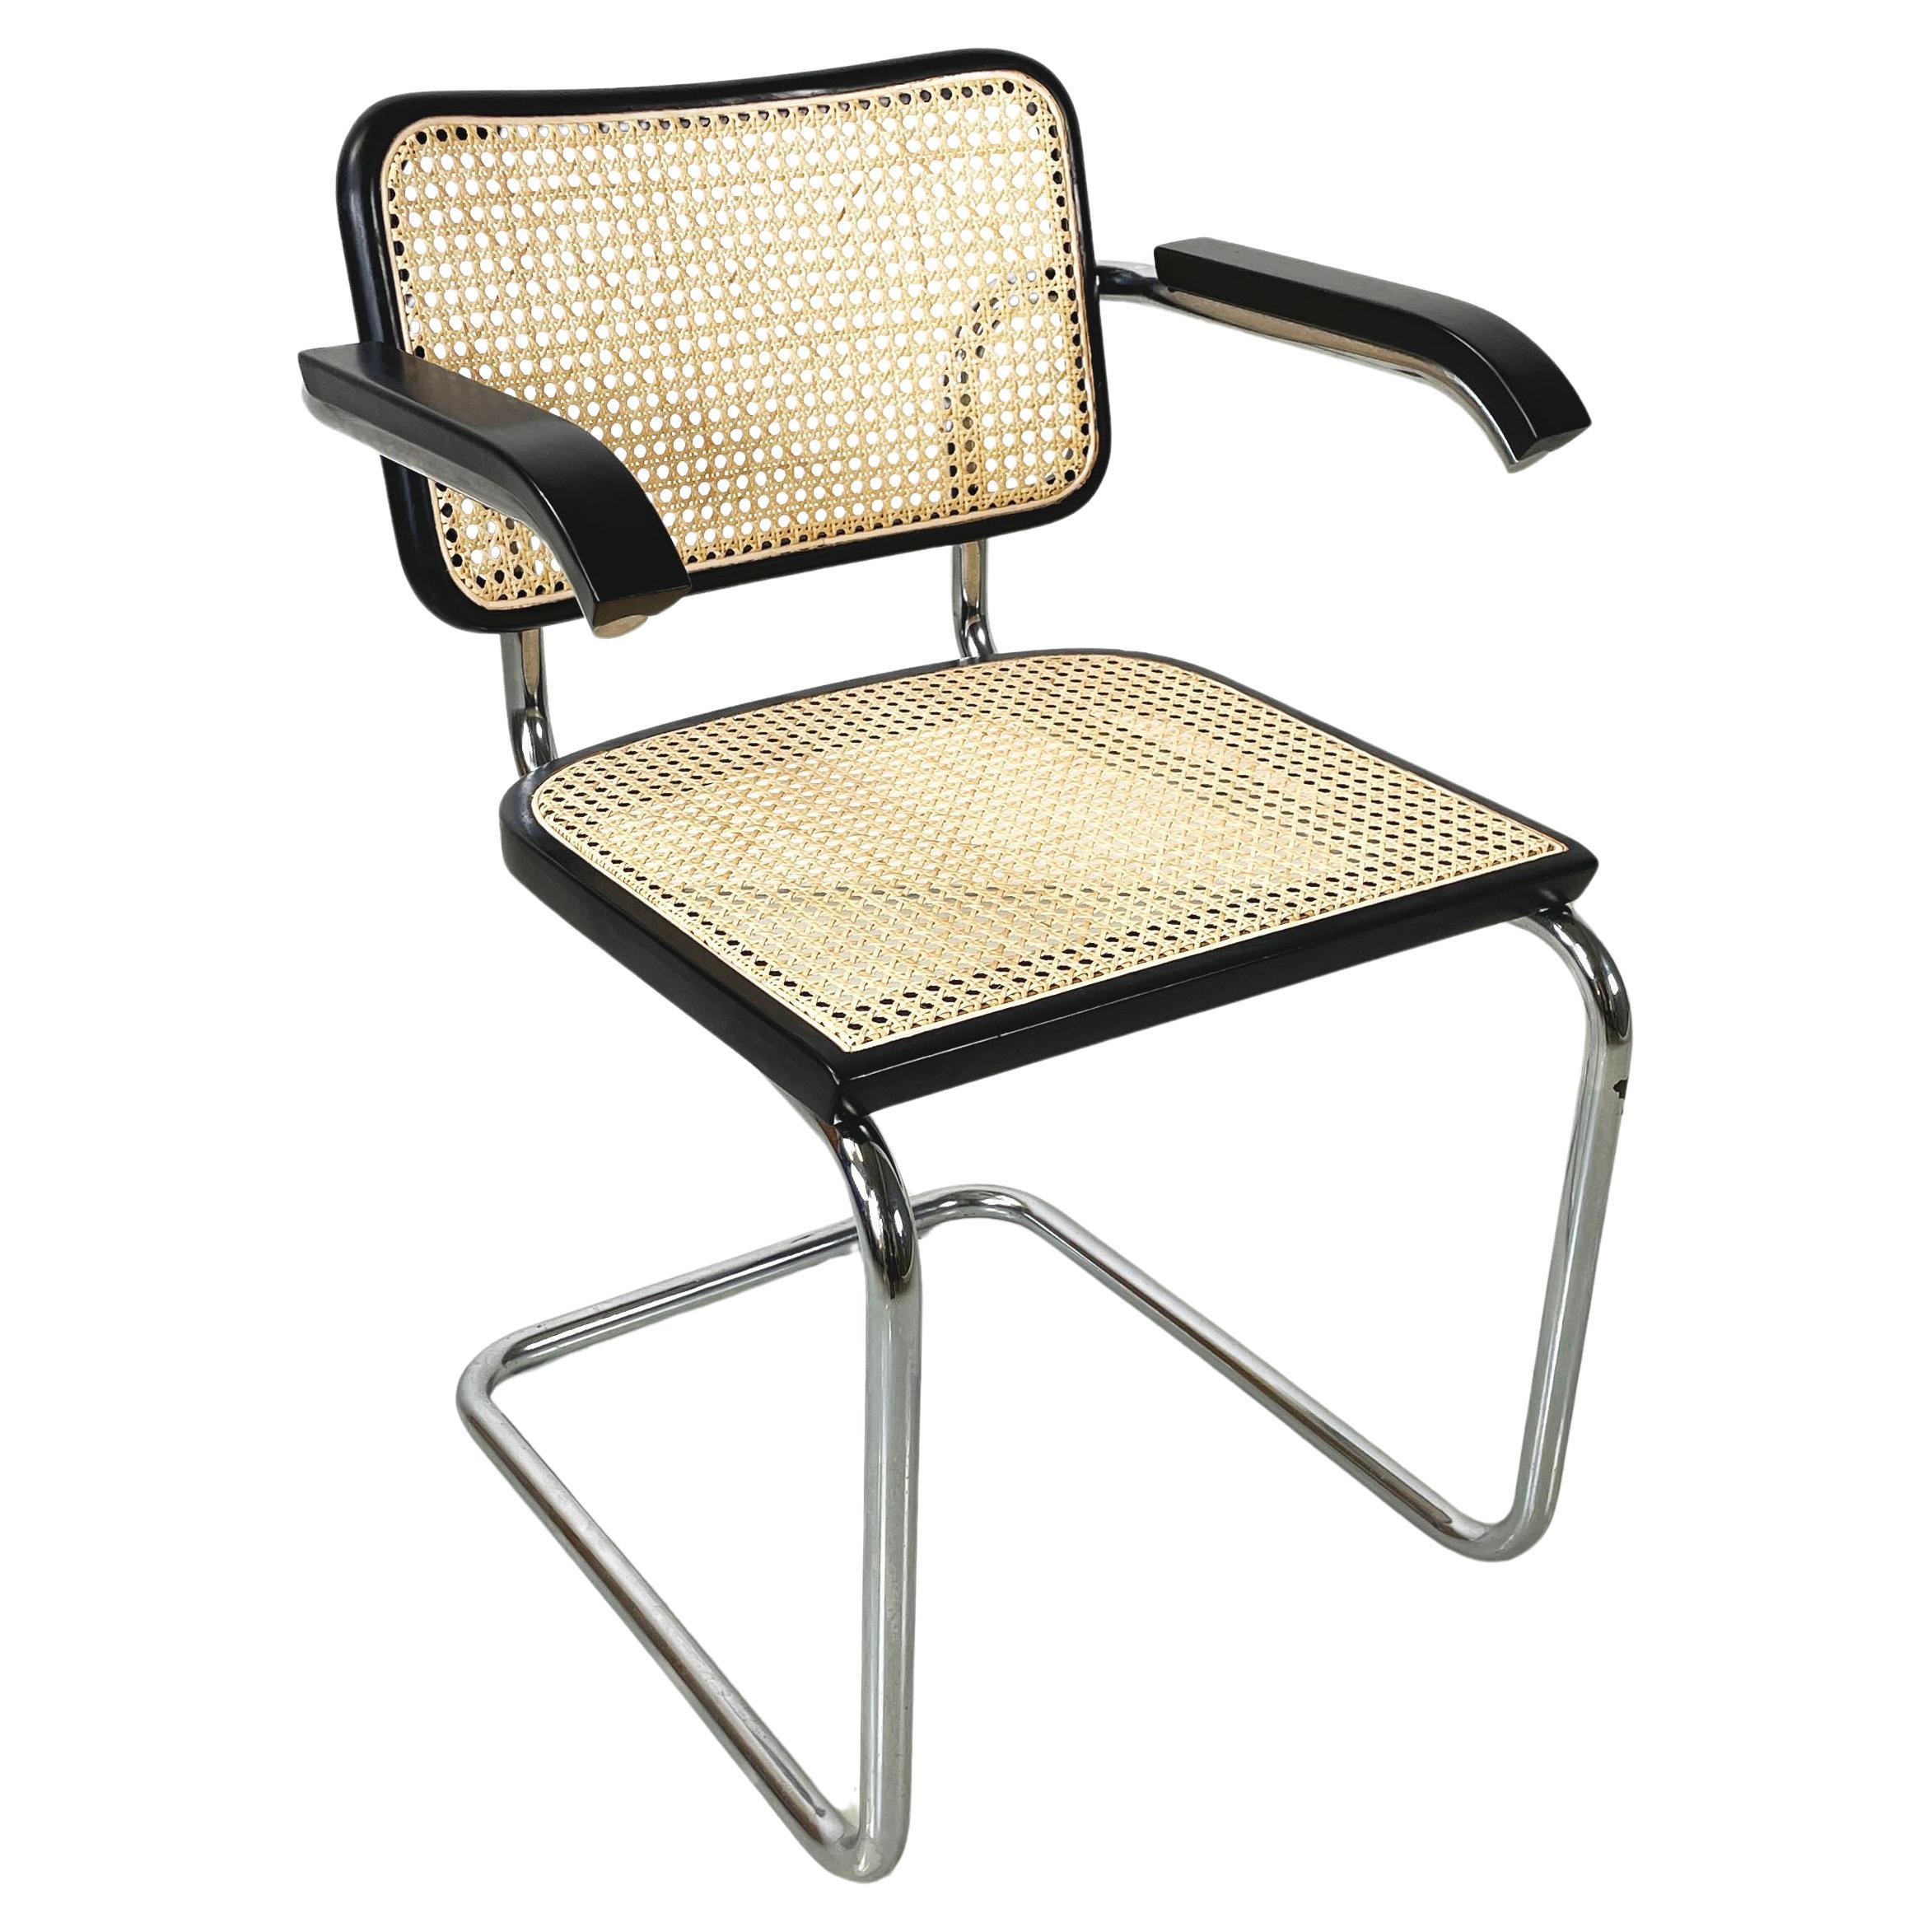 Italian mid-century modern Chair with armrests by Marcel Breuer for Gavina 1960s For Sale